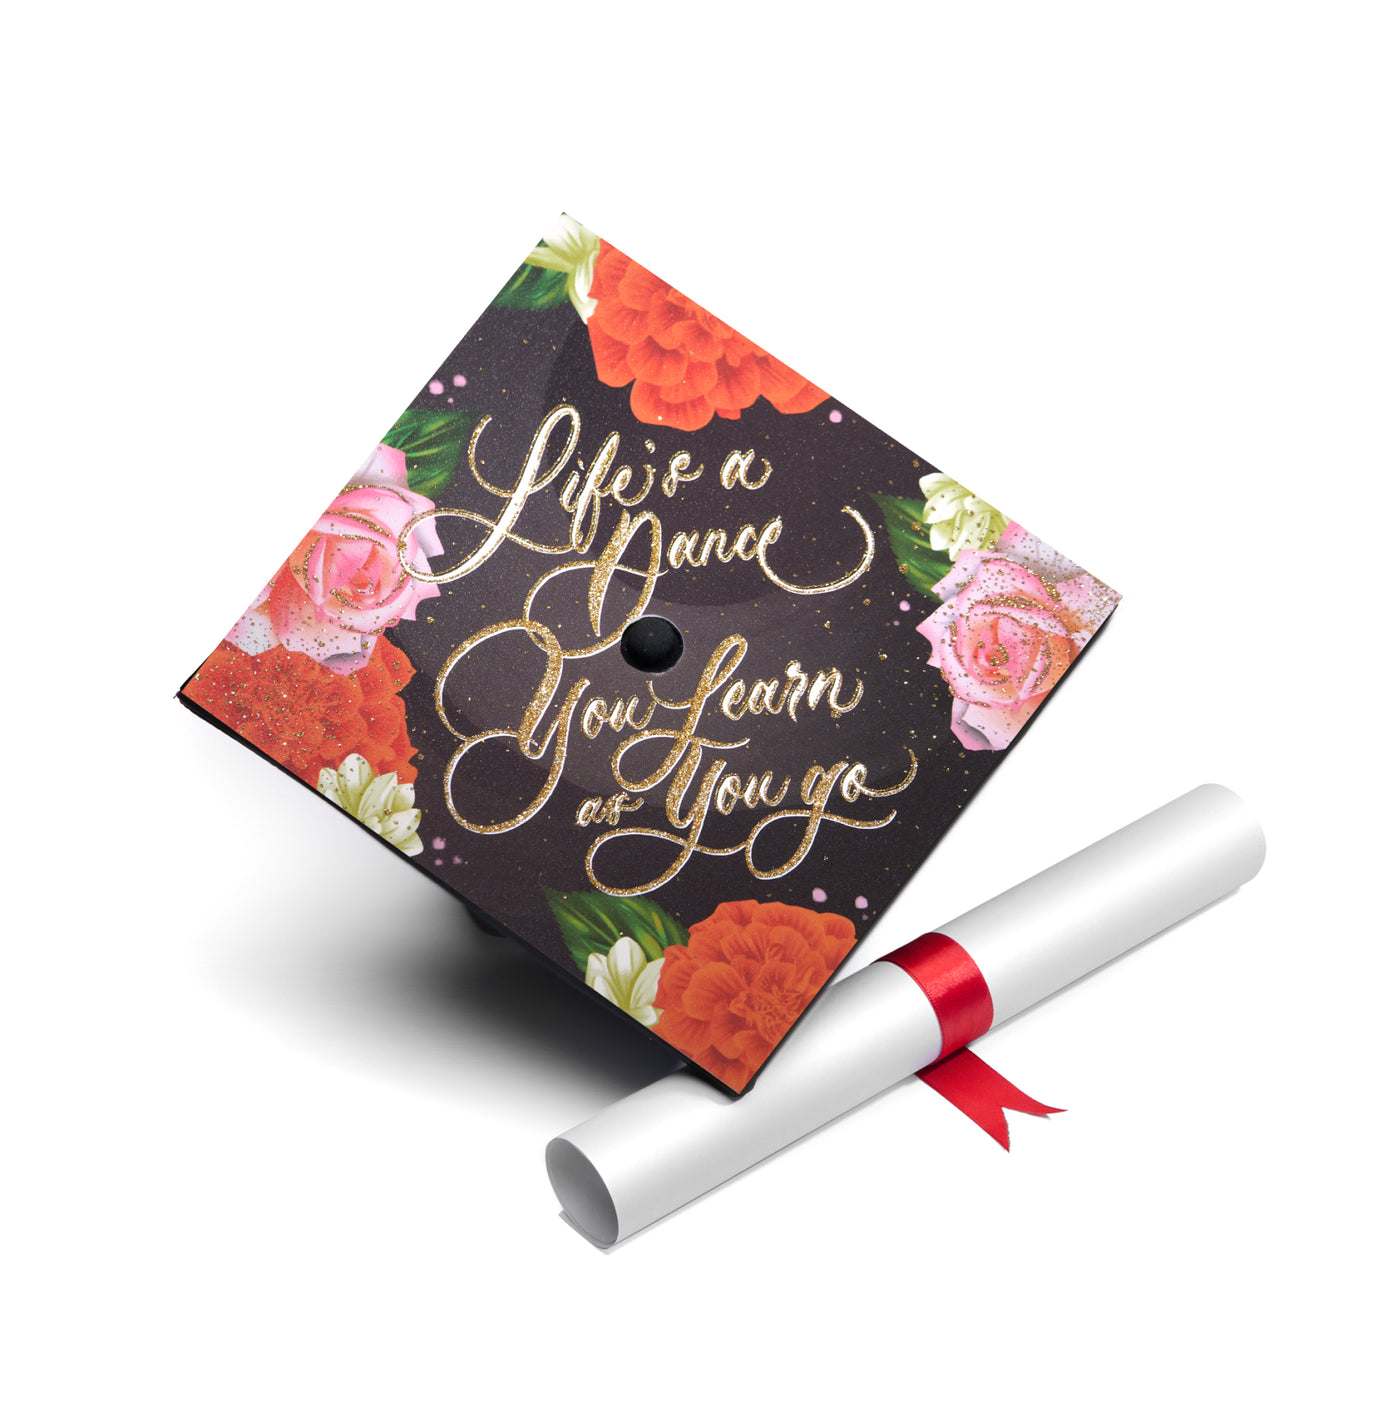 Graduation cap topper art print, Life is a dance you learn as you go